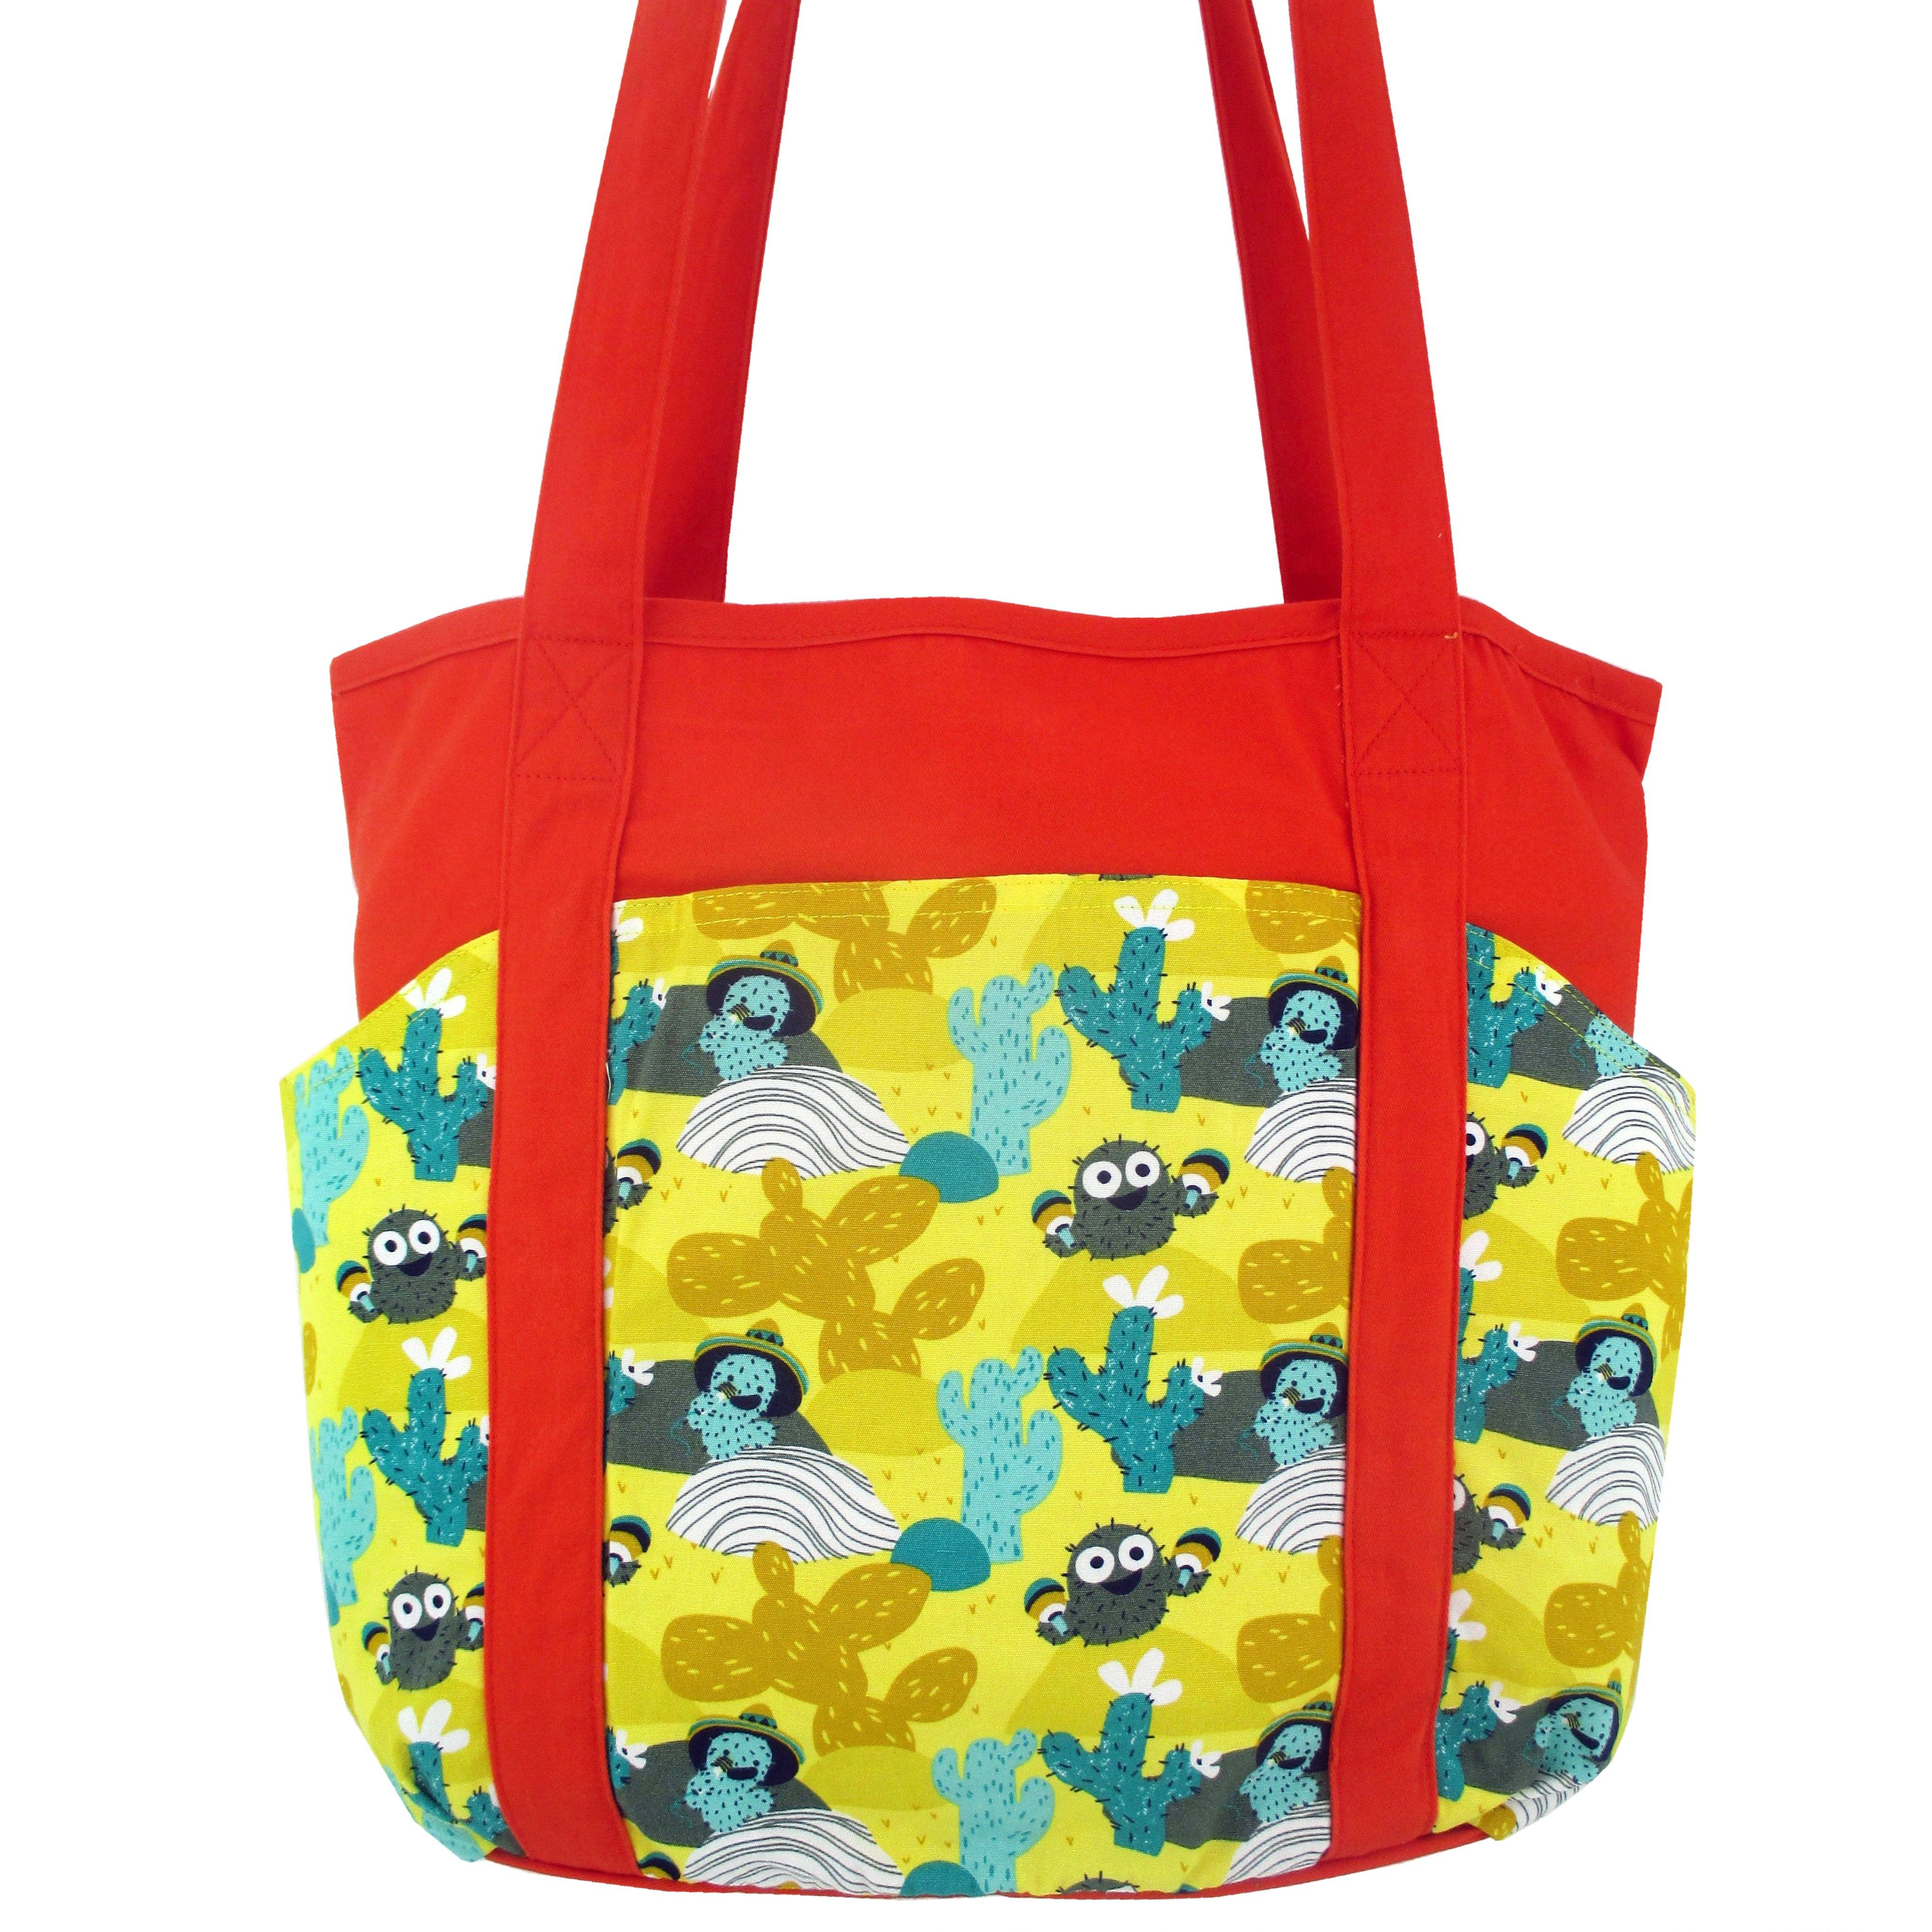 Yellow Orange Cactus All Over Print Weekend Travel Tote Bag with Pockets